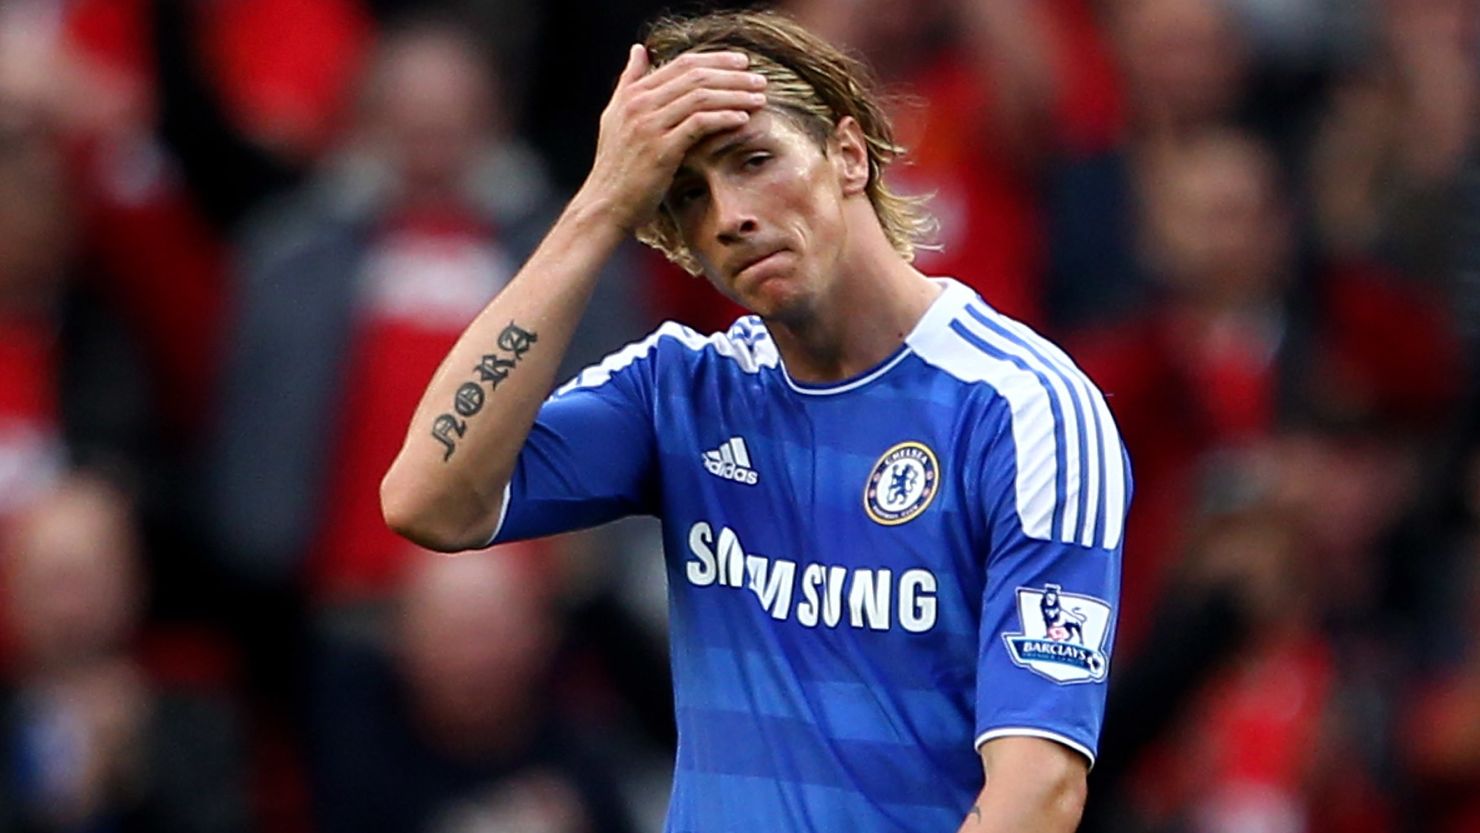 Fernando Torres has scored just twice for Chelsea since joining from Liverpool in January.